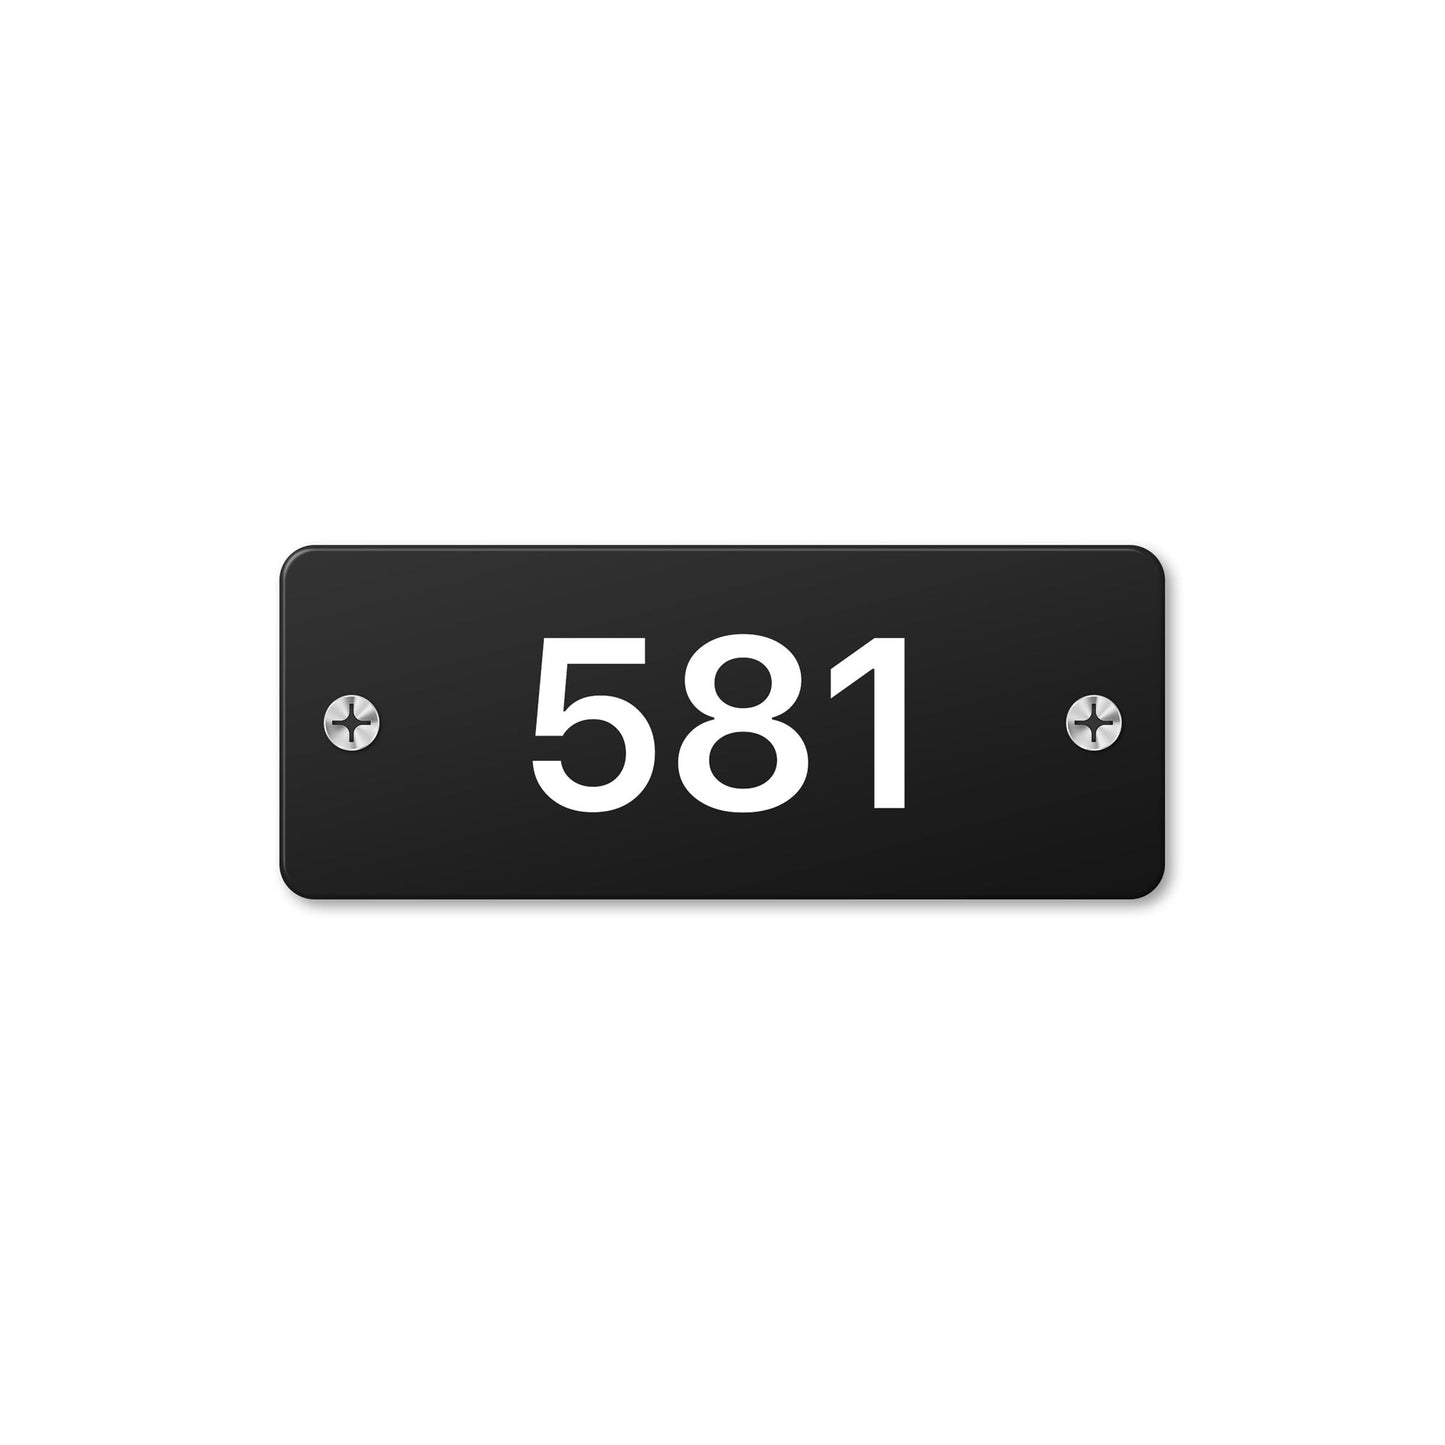 Numeral 581